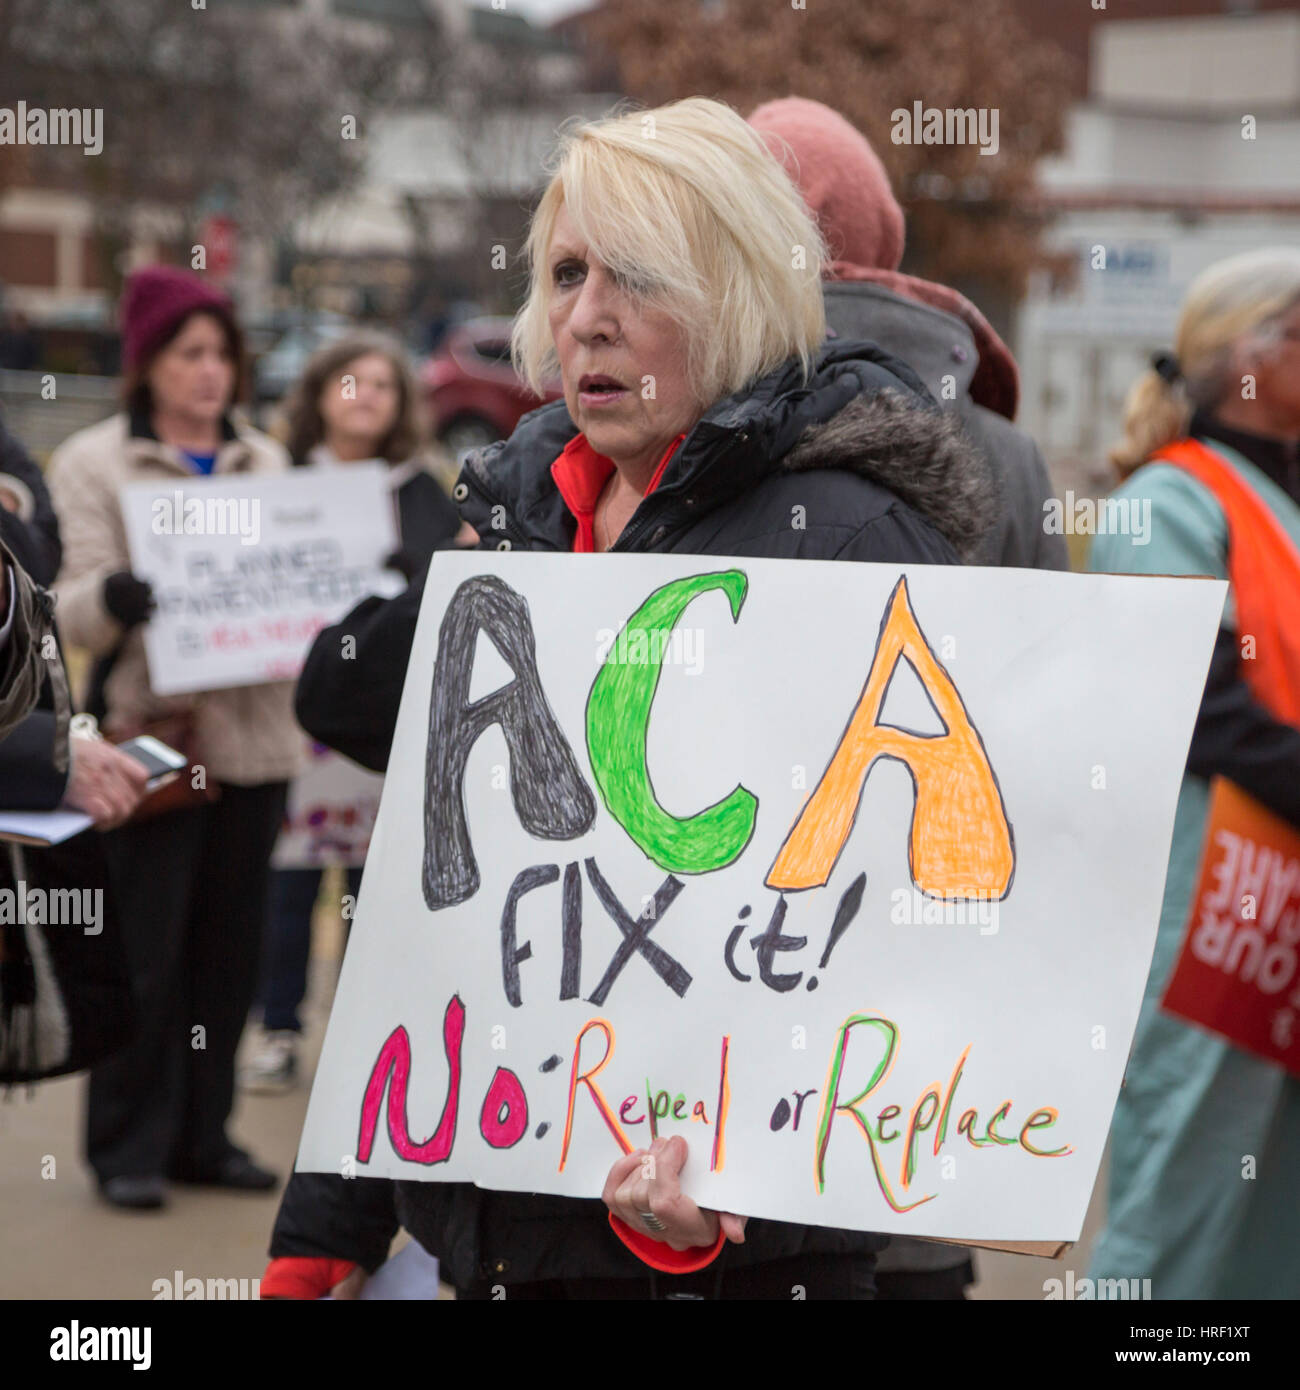 Birmingham, Michigan - People rally to save affordable health care. They were protesting Republicans' plan to repeal the Affordable Care Act. Stock Photo